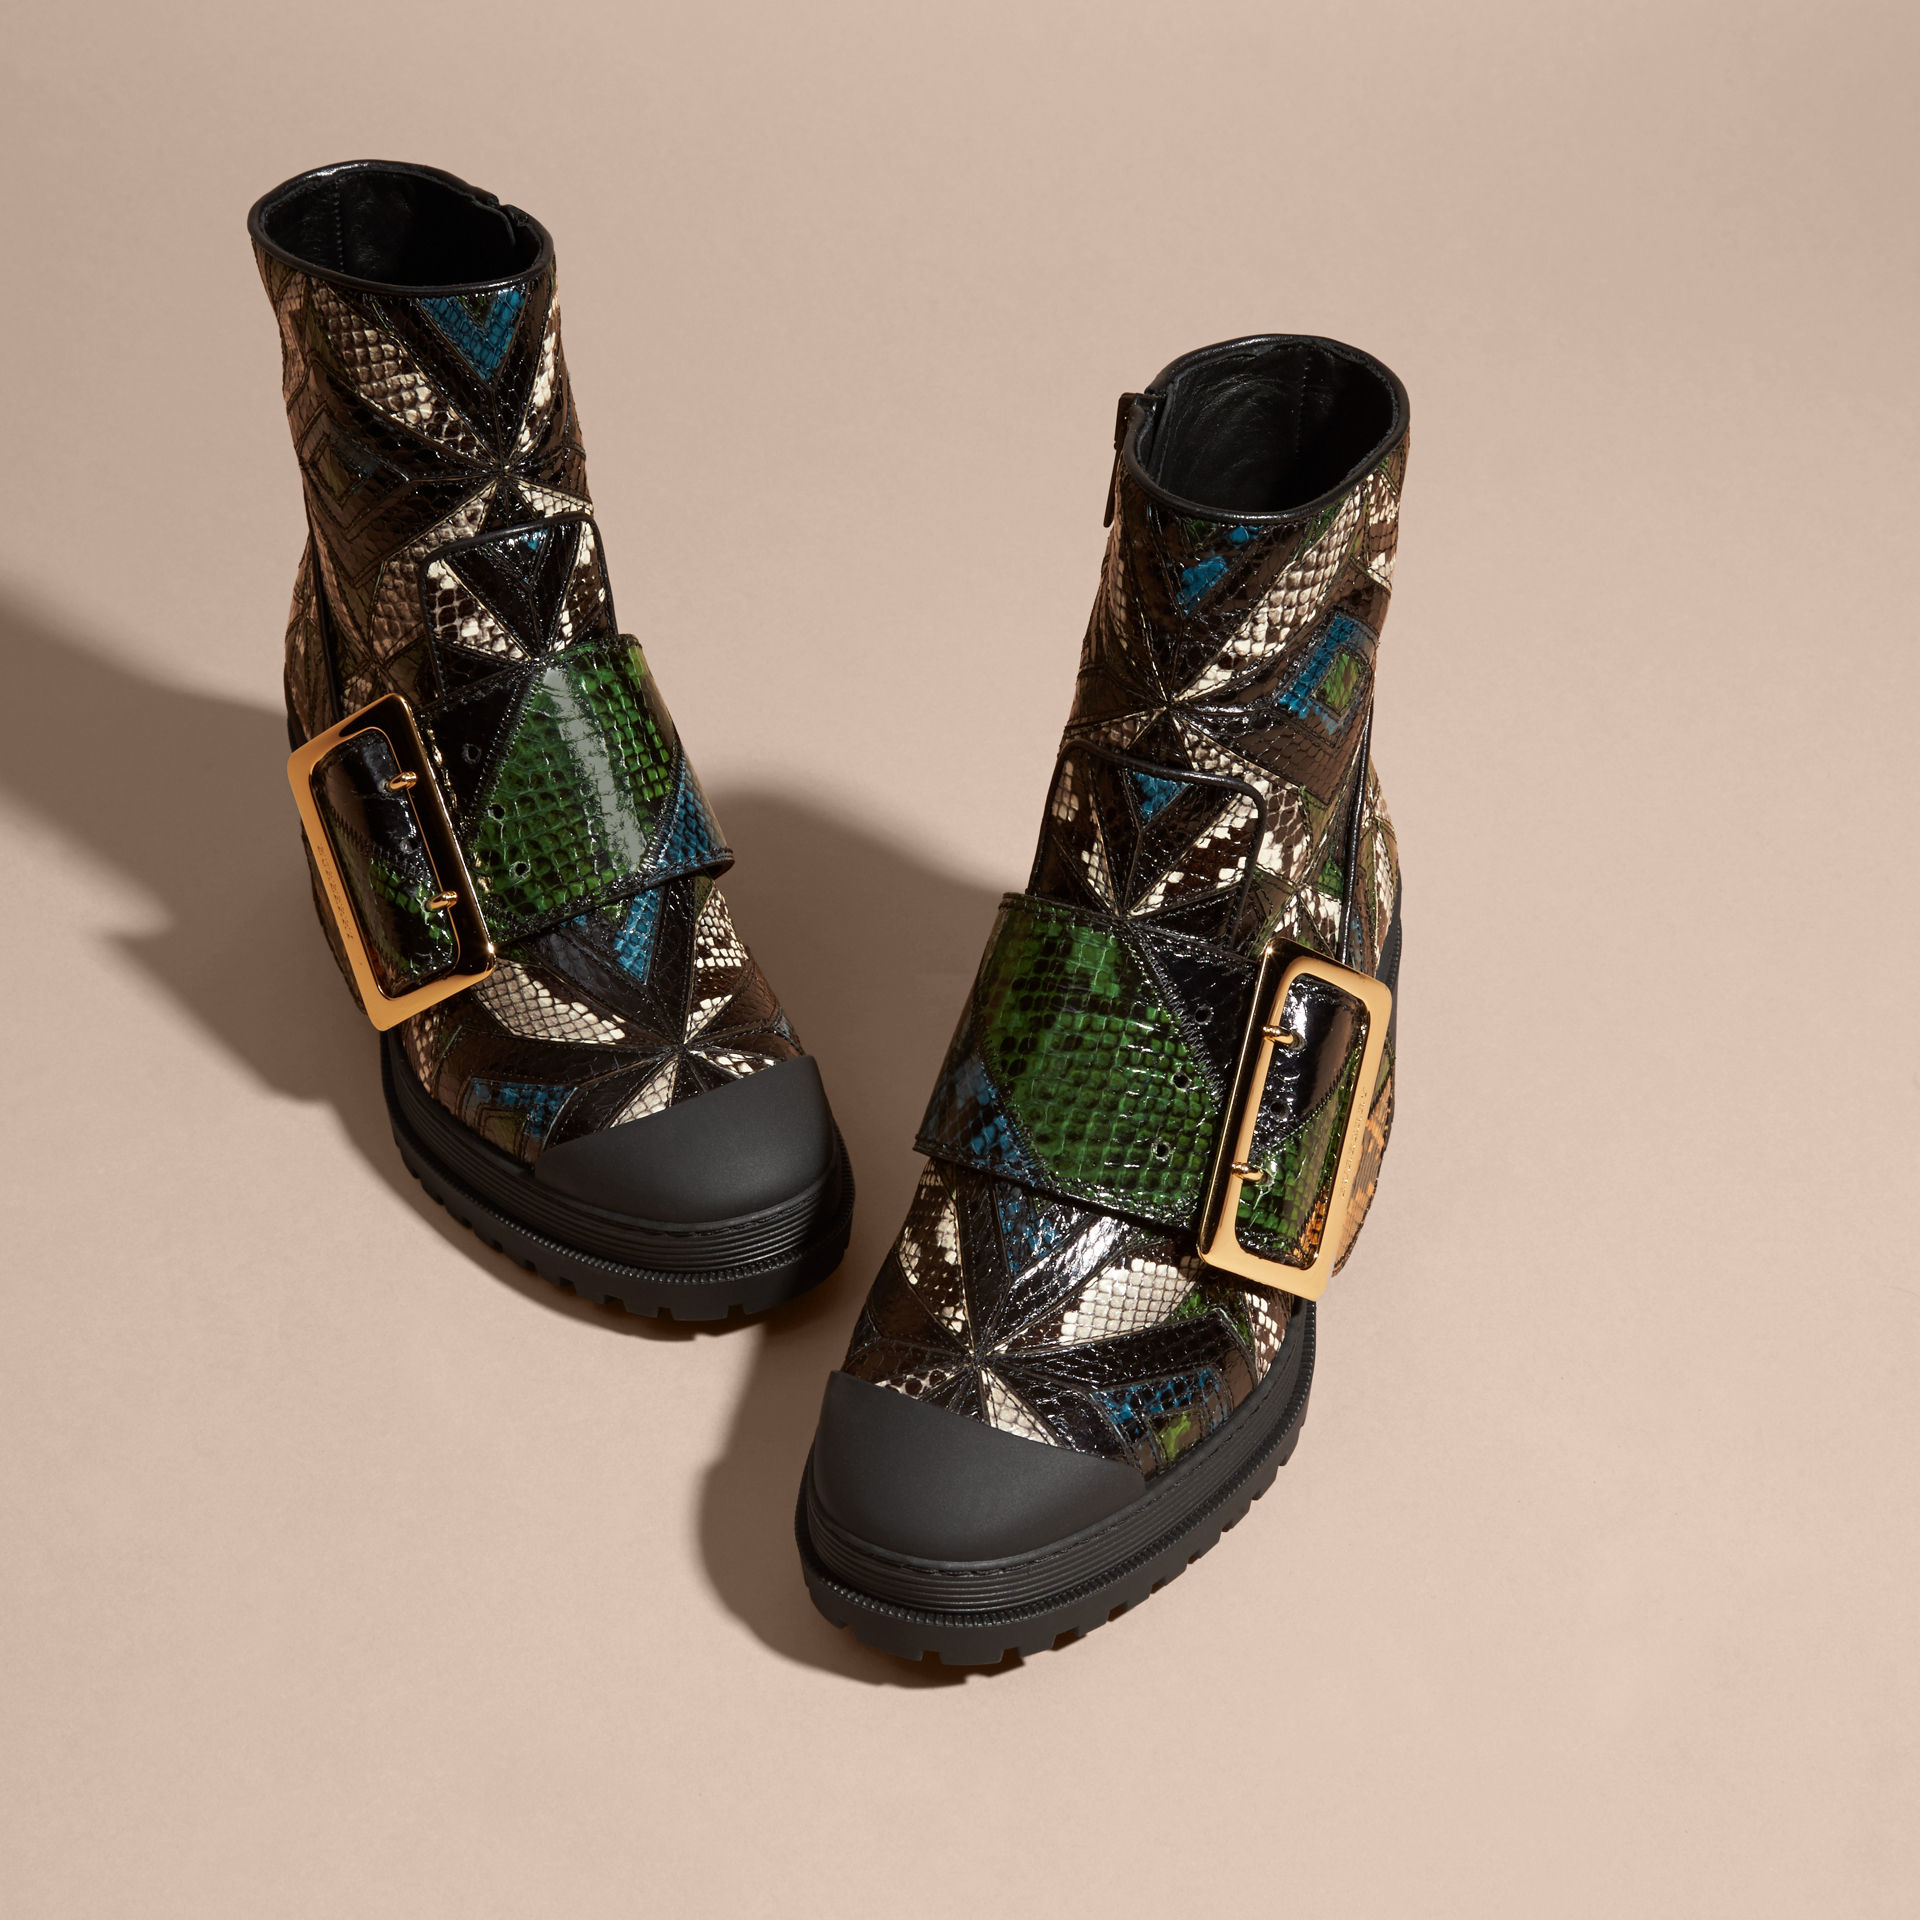 Burberry Denim Snakeskin Ankle Boots in 